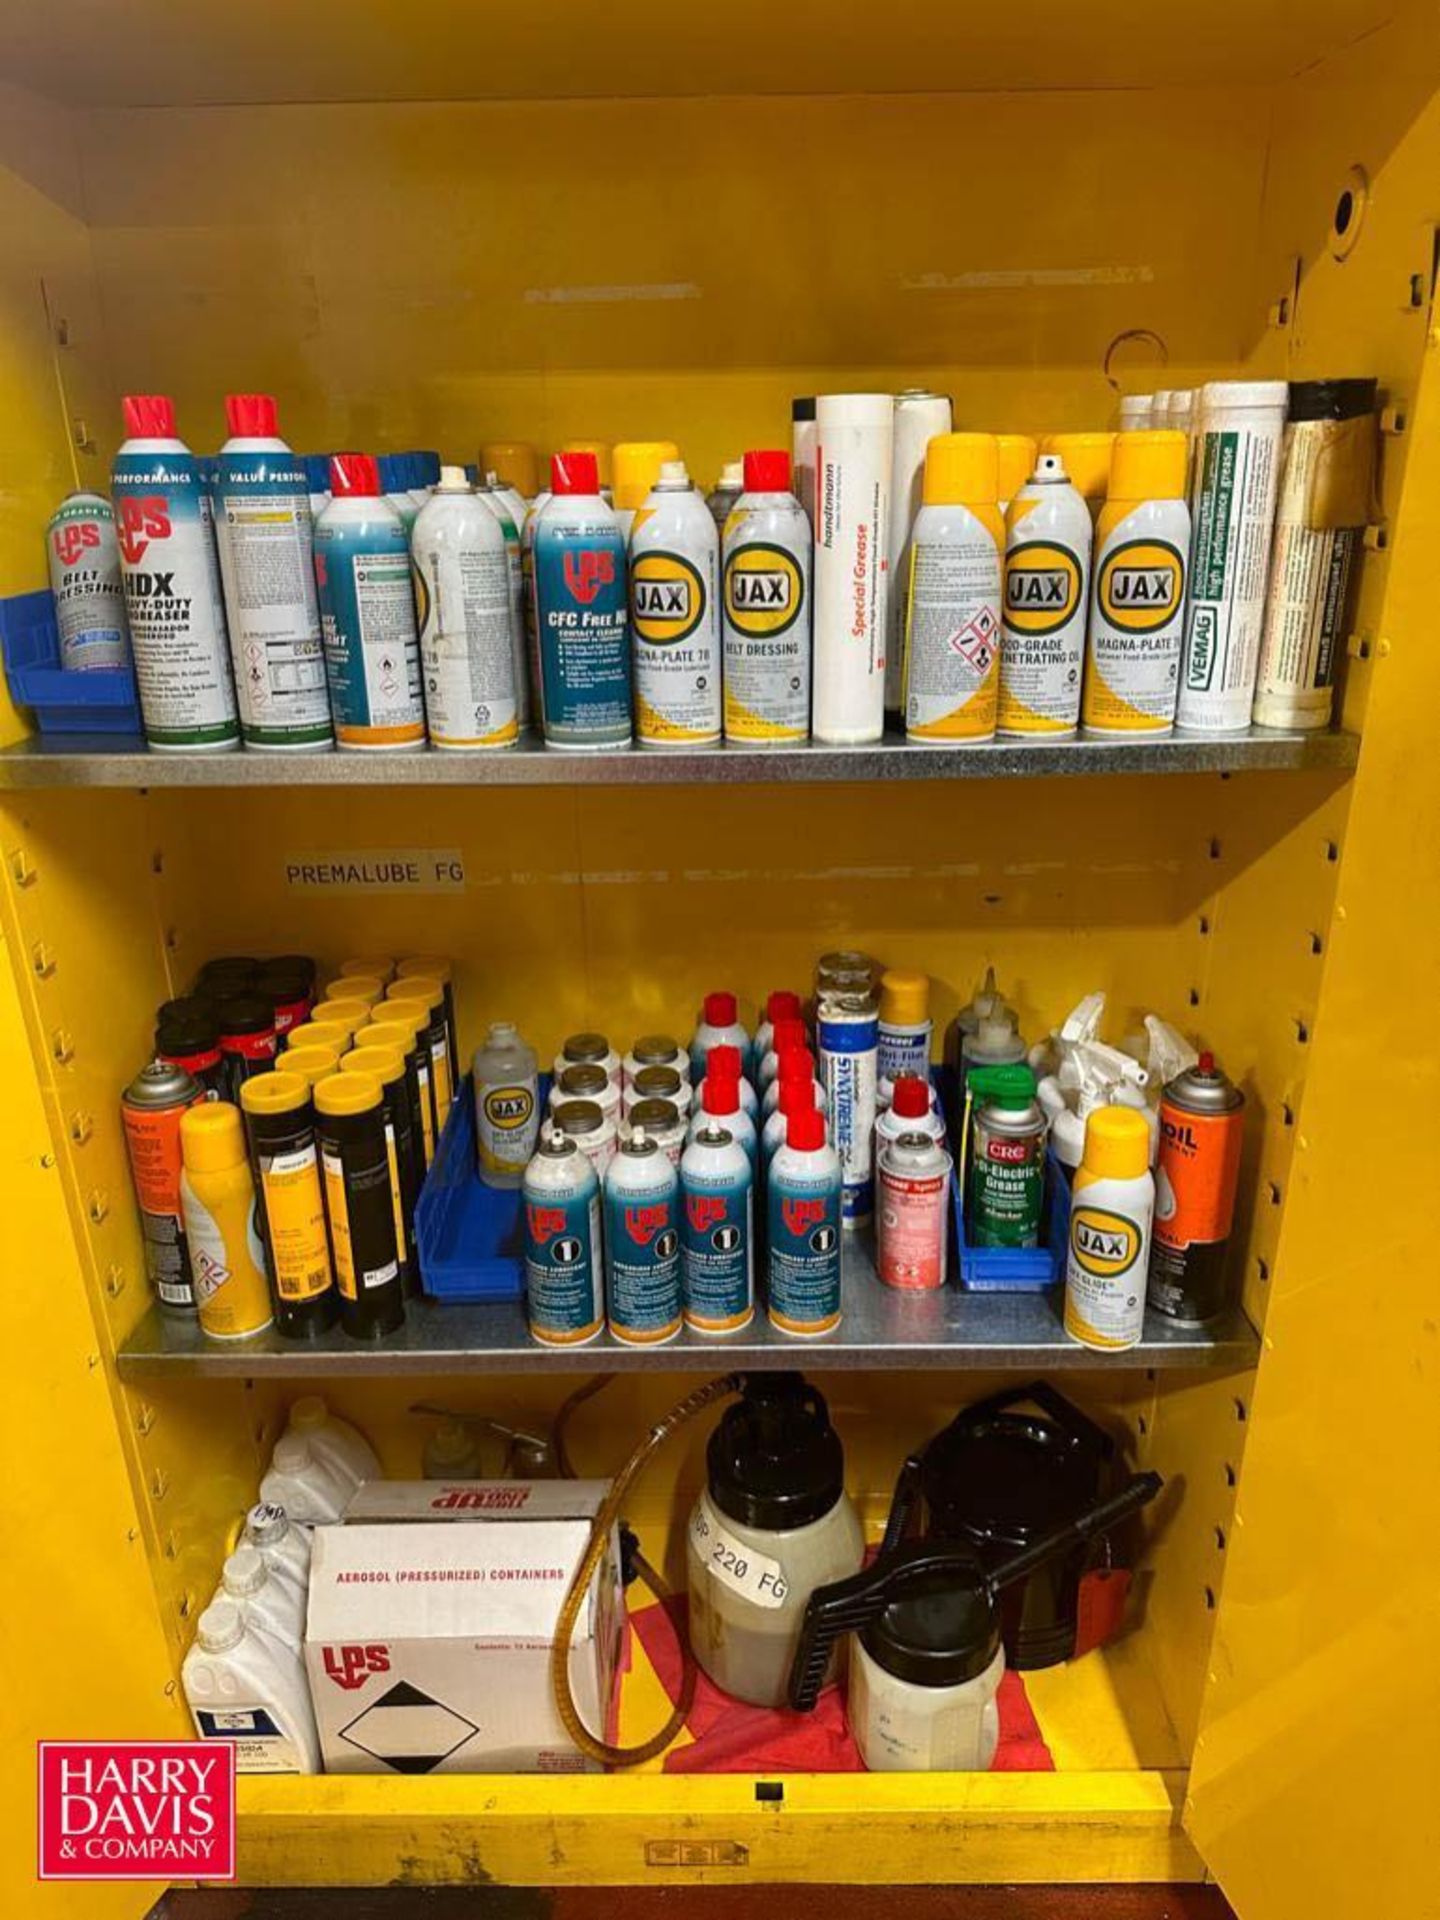 Flammable Liquid Storage Cabinet: 65" x 43” x 18” with Assorted Lubricants - Rigging Fee: $200